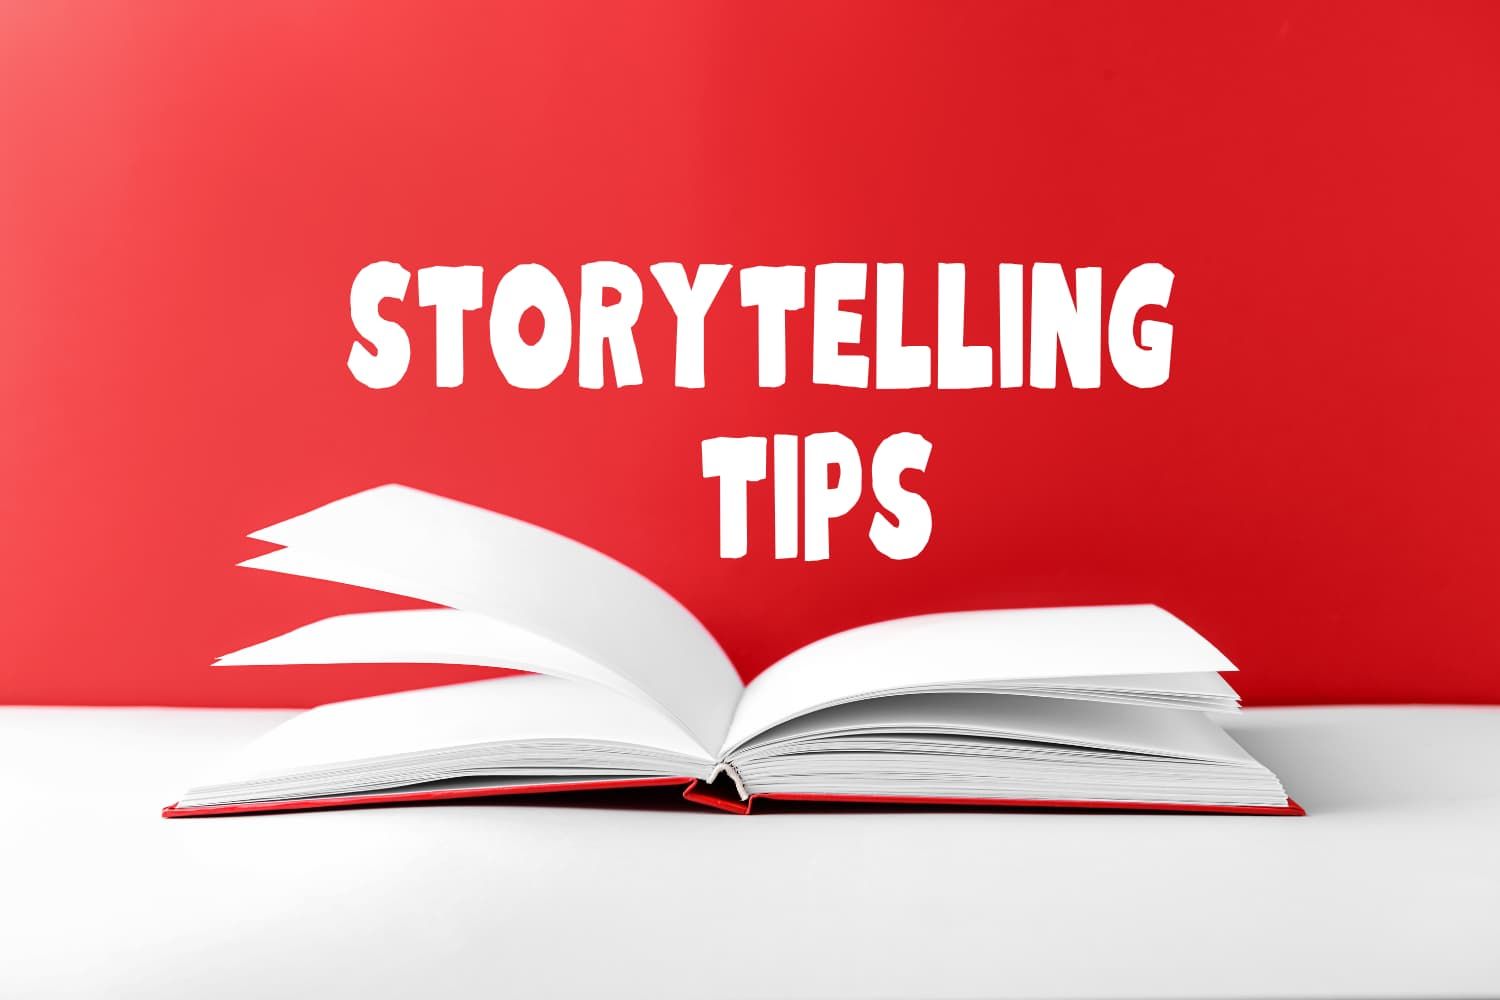 Storytelling%20tips%20-%20NT%20The%20pharisee%20and%20the%20tax%20collector%20-%20Teaching%20the%20parable%20of%20the%20tax%20collector%20and%20pharisee-bb2ec4e5 Forgiveness